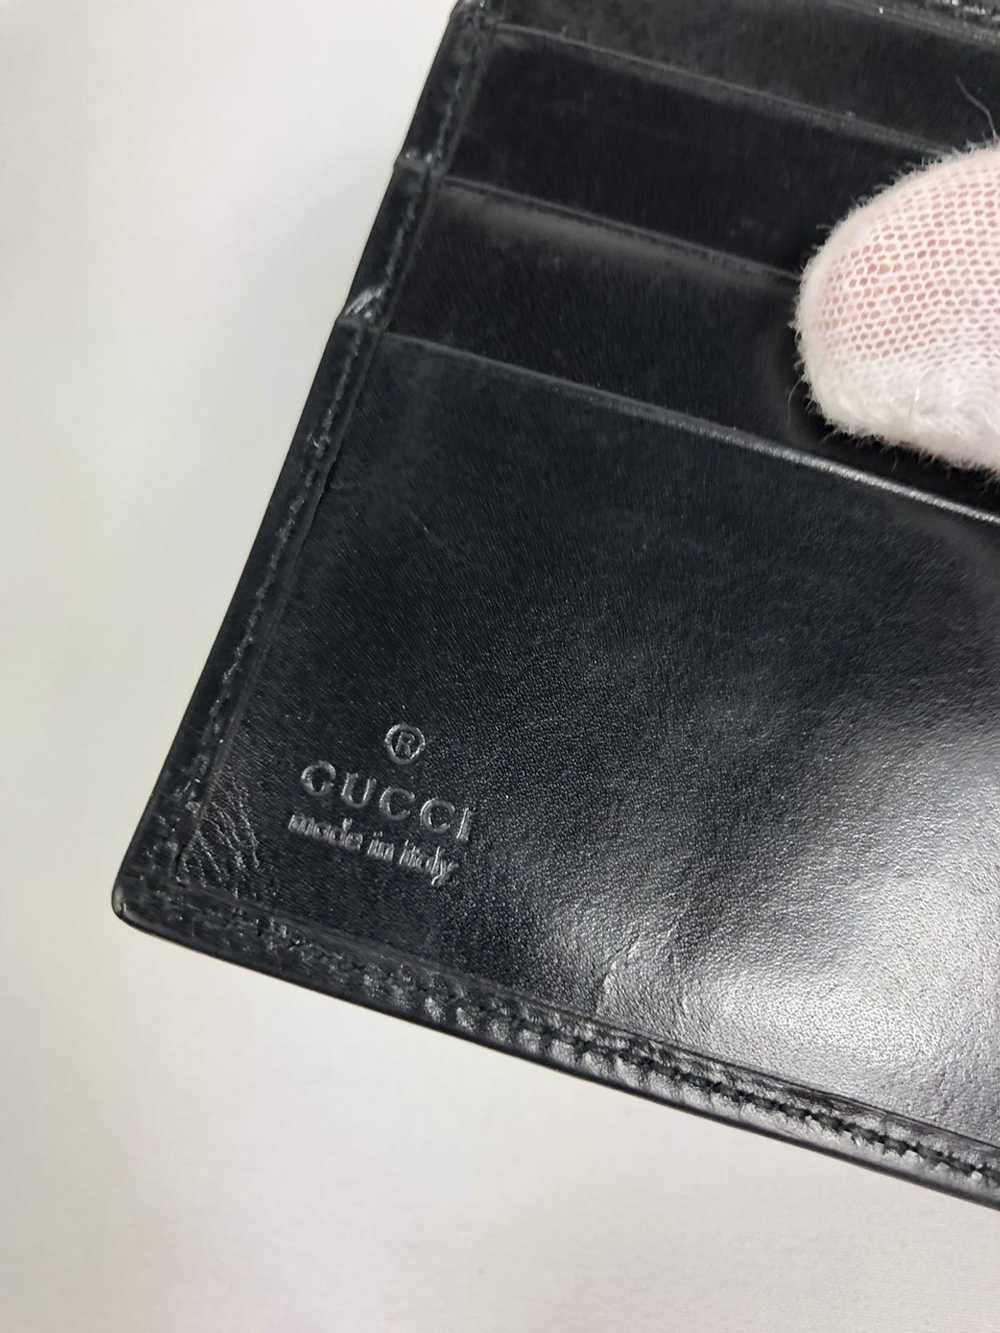 Gucci Gucci G leather bifold wallet - image 5